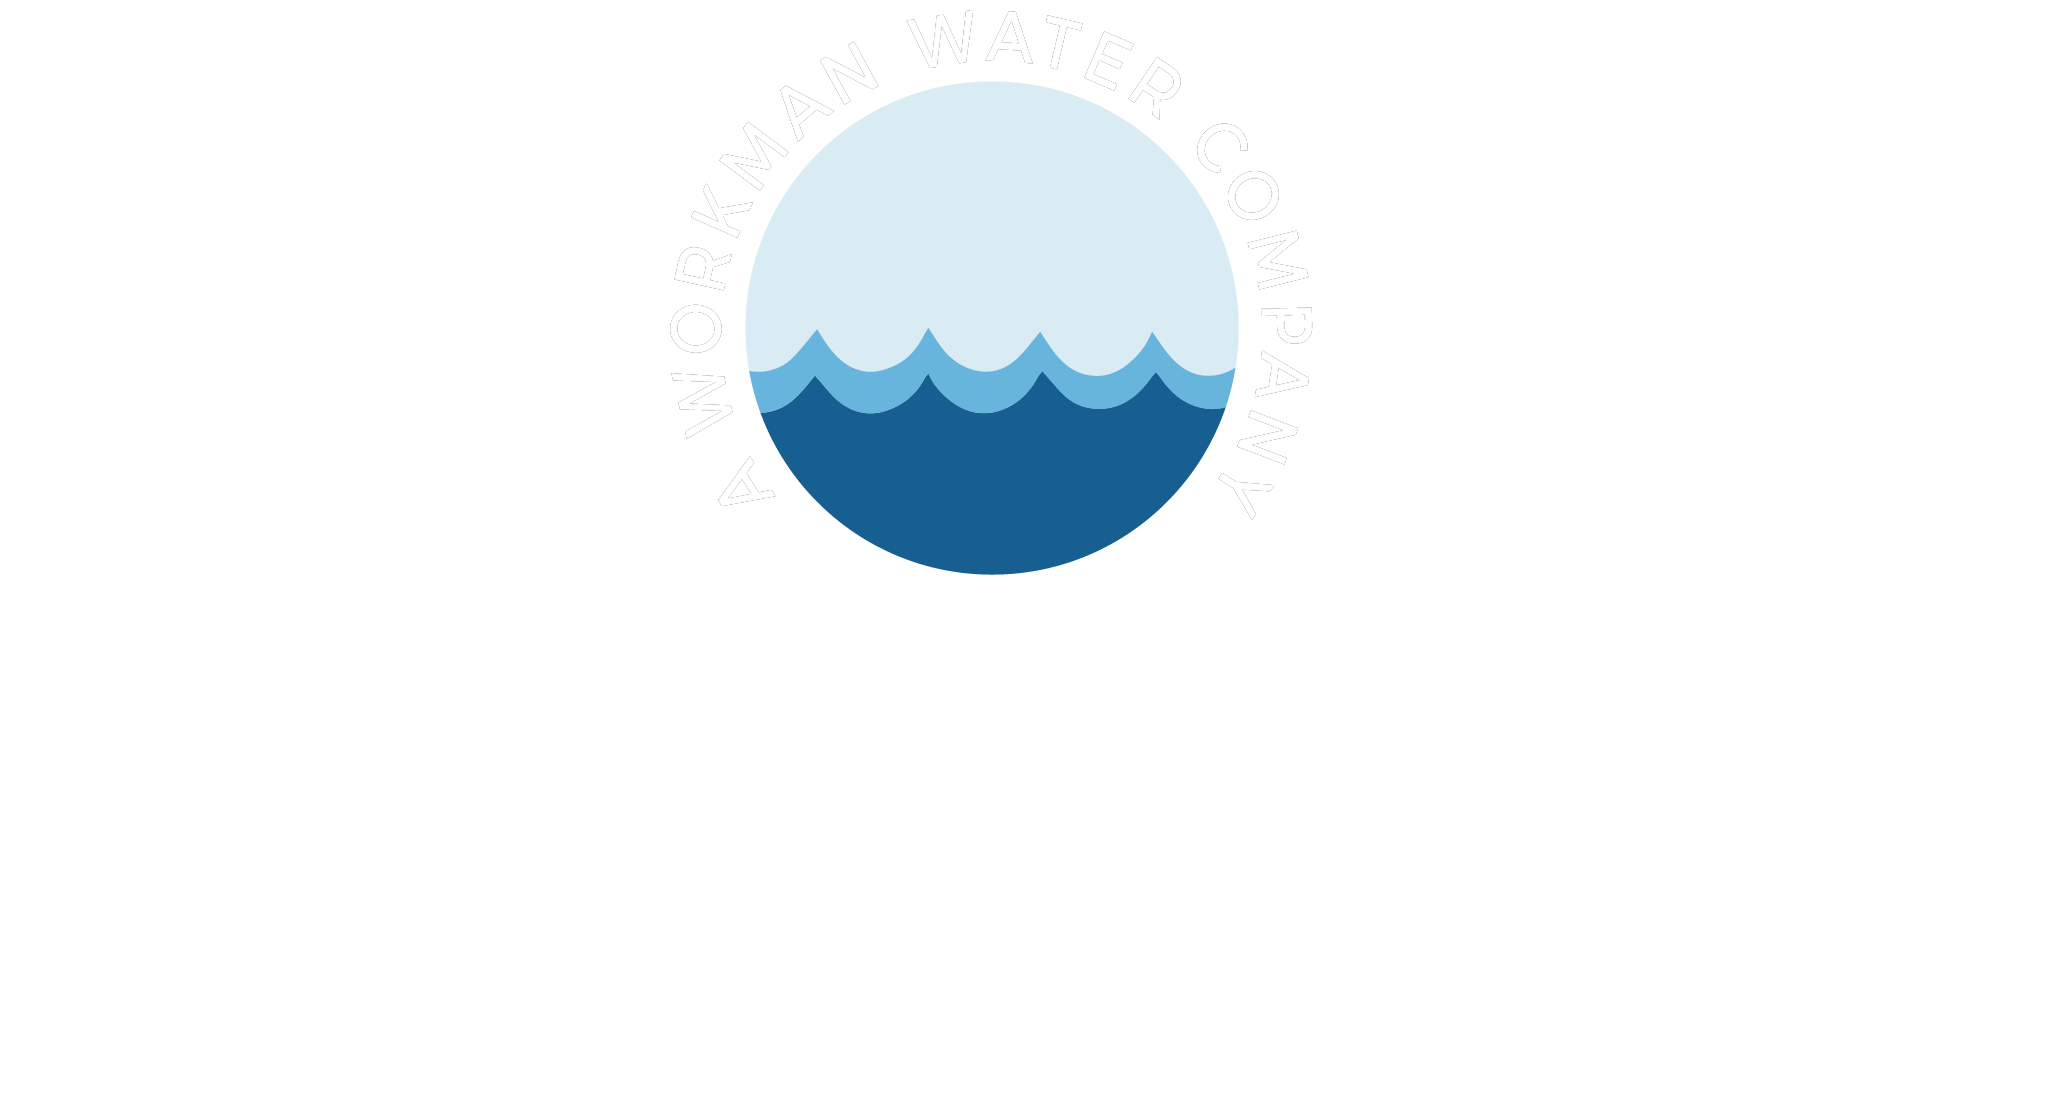 Bruce & Son Water Hauling